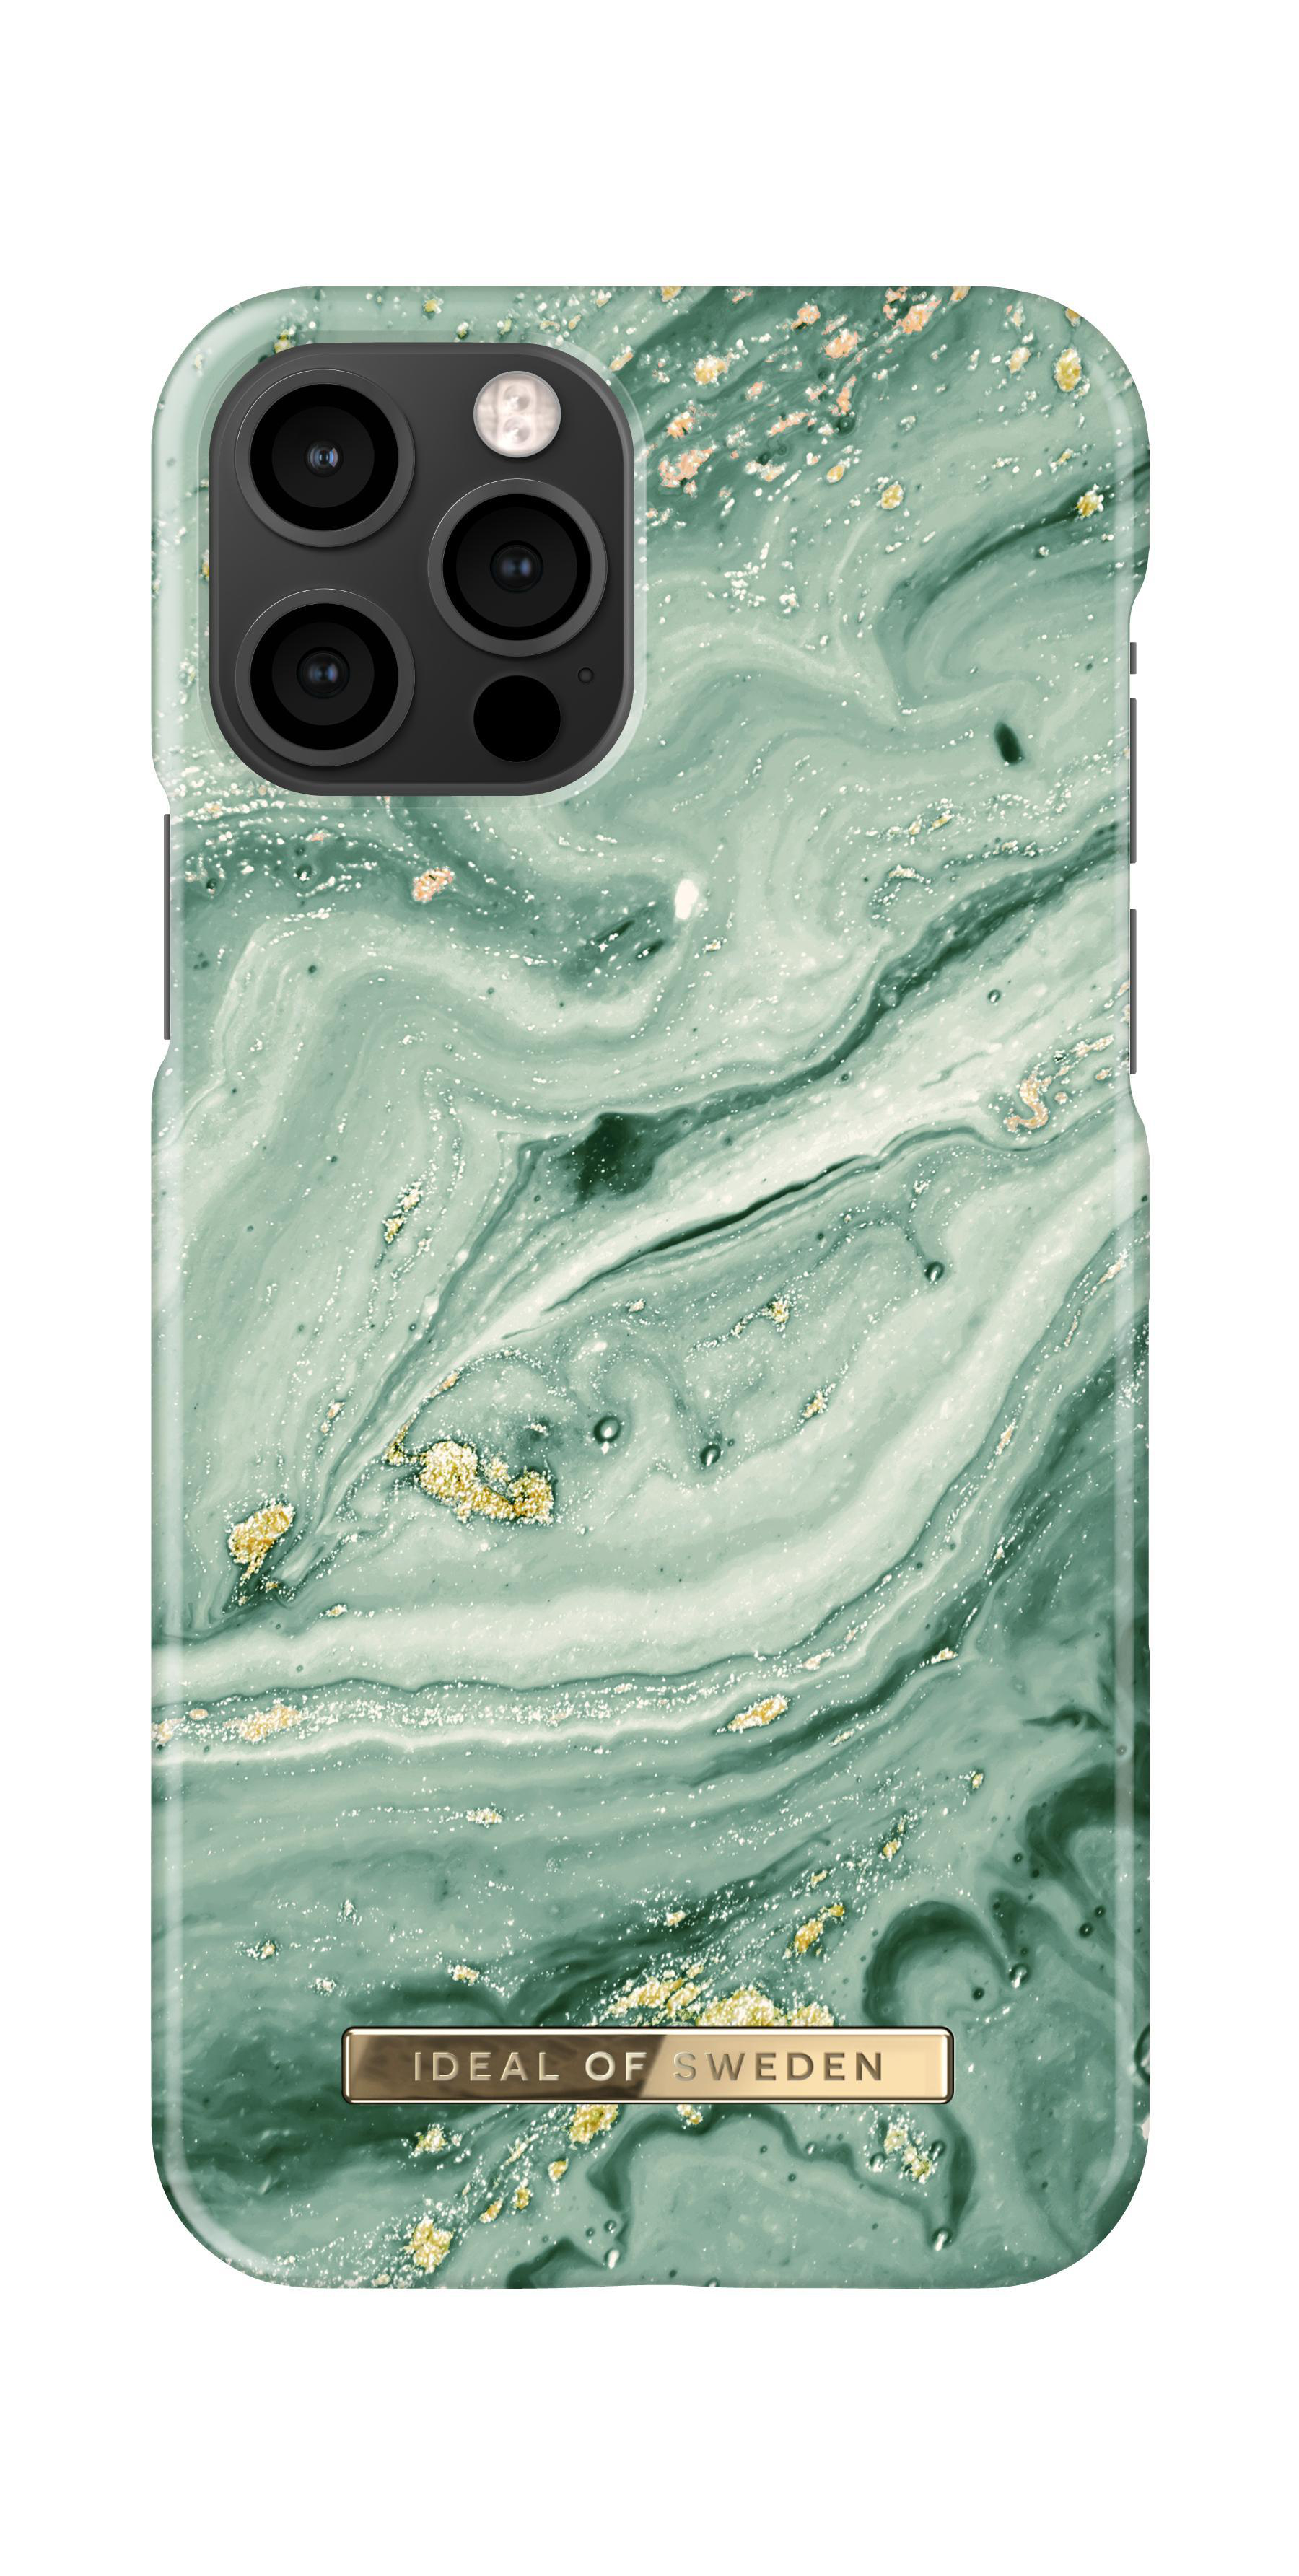 IDEAL OF iPhone Green Pro, Apple, iPhone SWEDEN Fashion, 12, Backcover, 12